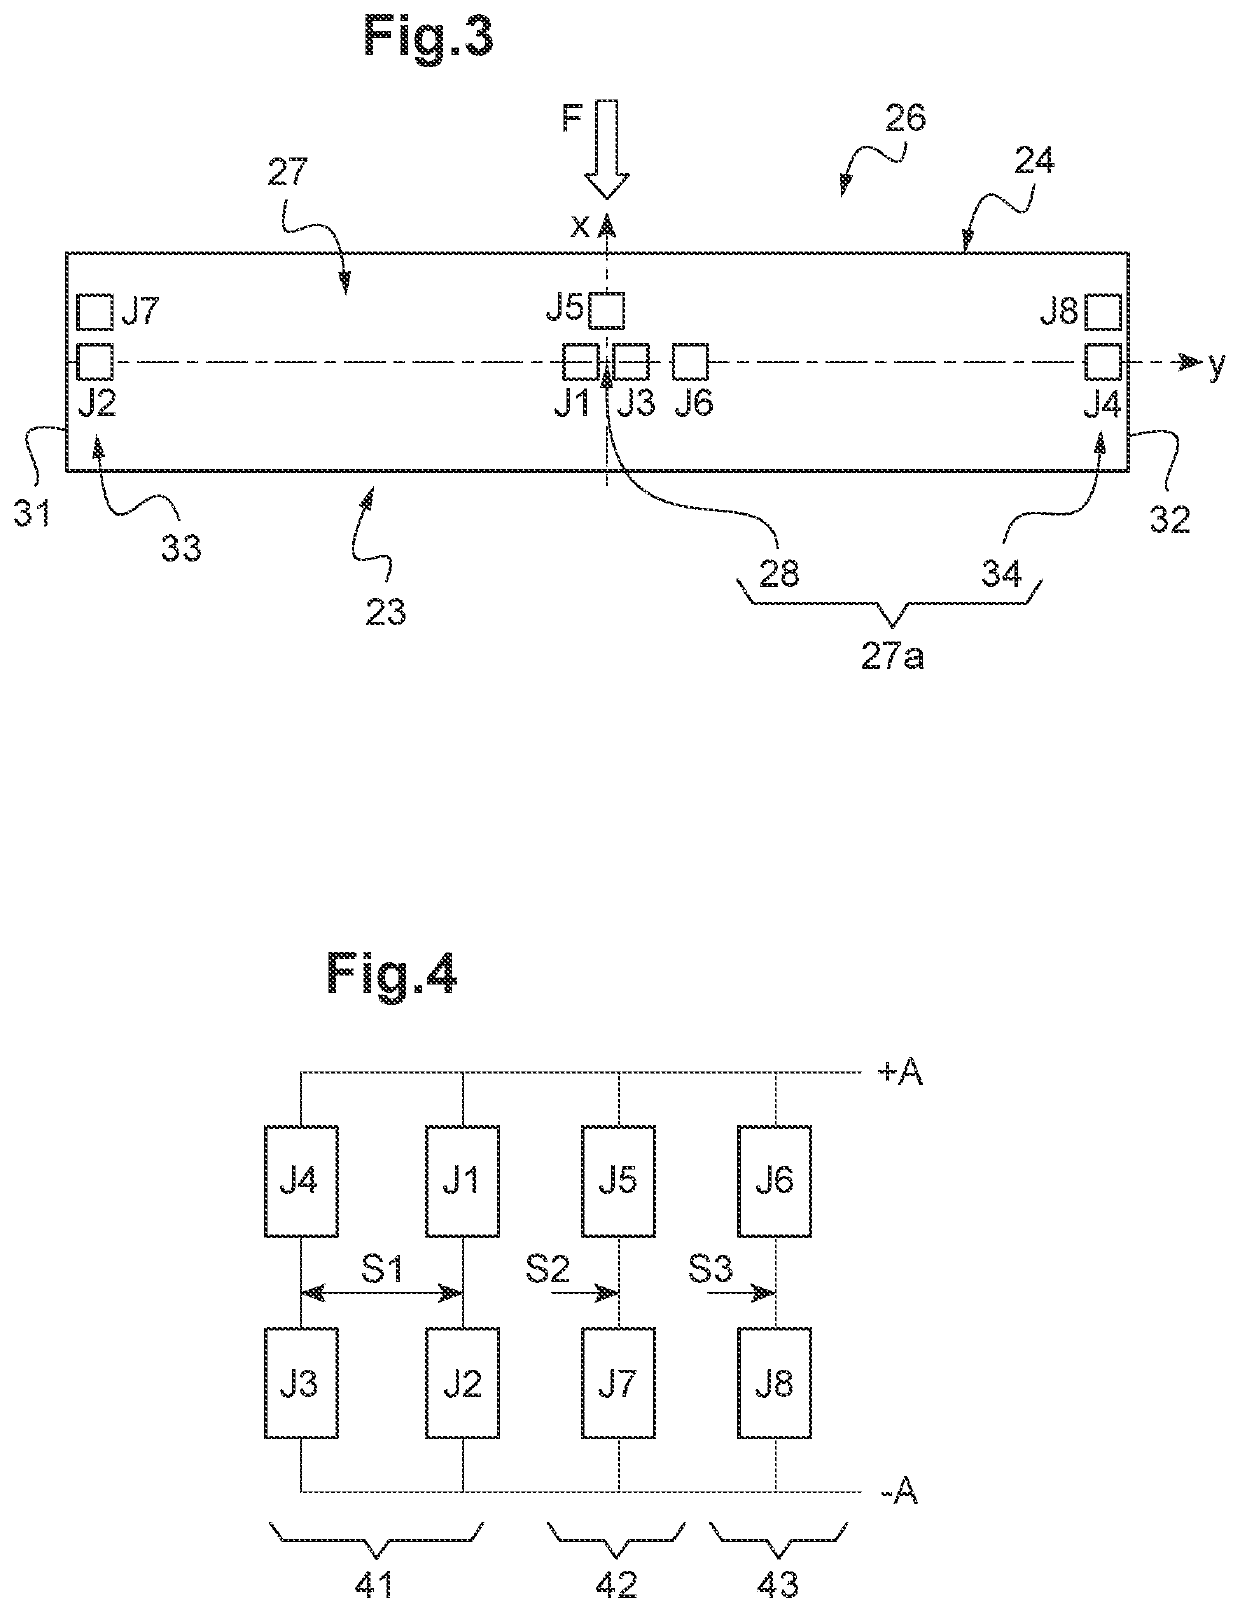 Sensor for measuring a tightening force applied on a screw-assembly member